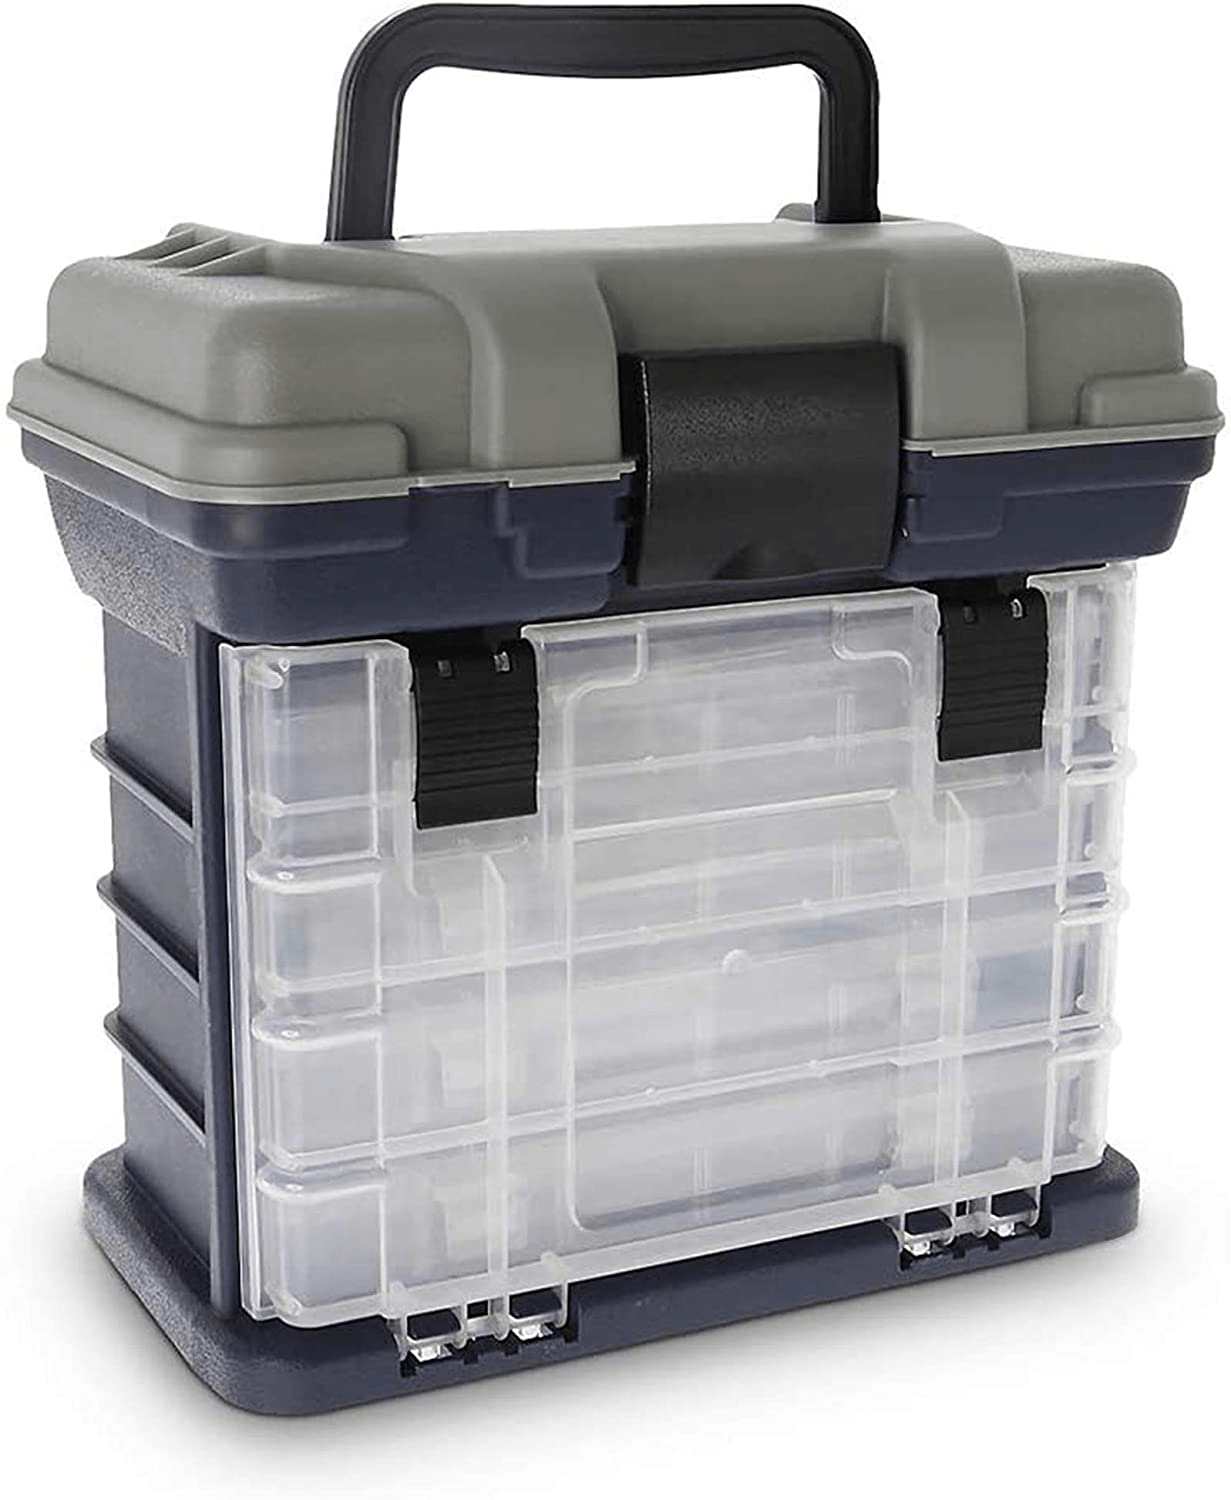 Croch Fishing Tackle Box with Portable 4 Layers Box，Bulk Storage under Lid Giving Room to Carry All Kinds of Fishing Accessories, Including Fishing Lures, Sinkers, Floats, Line and so On.